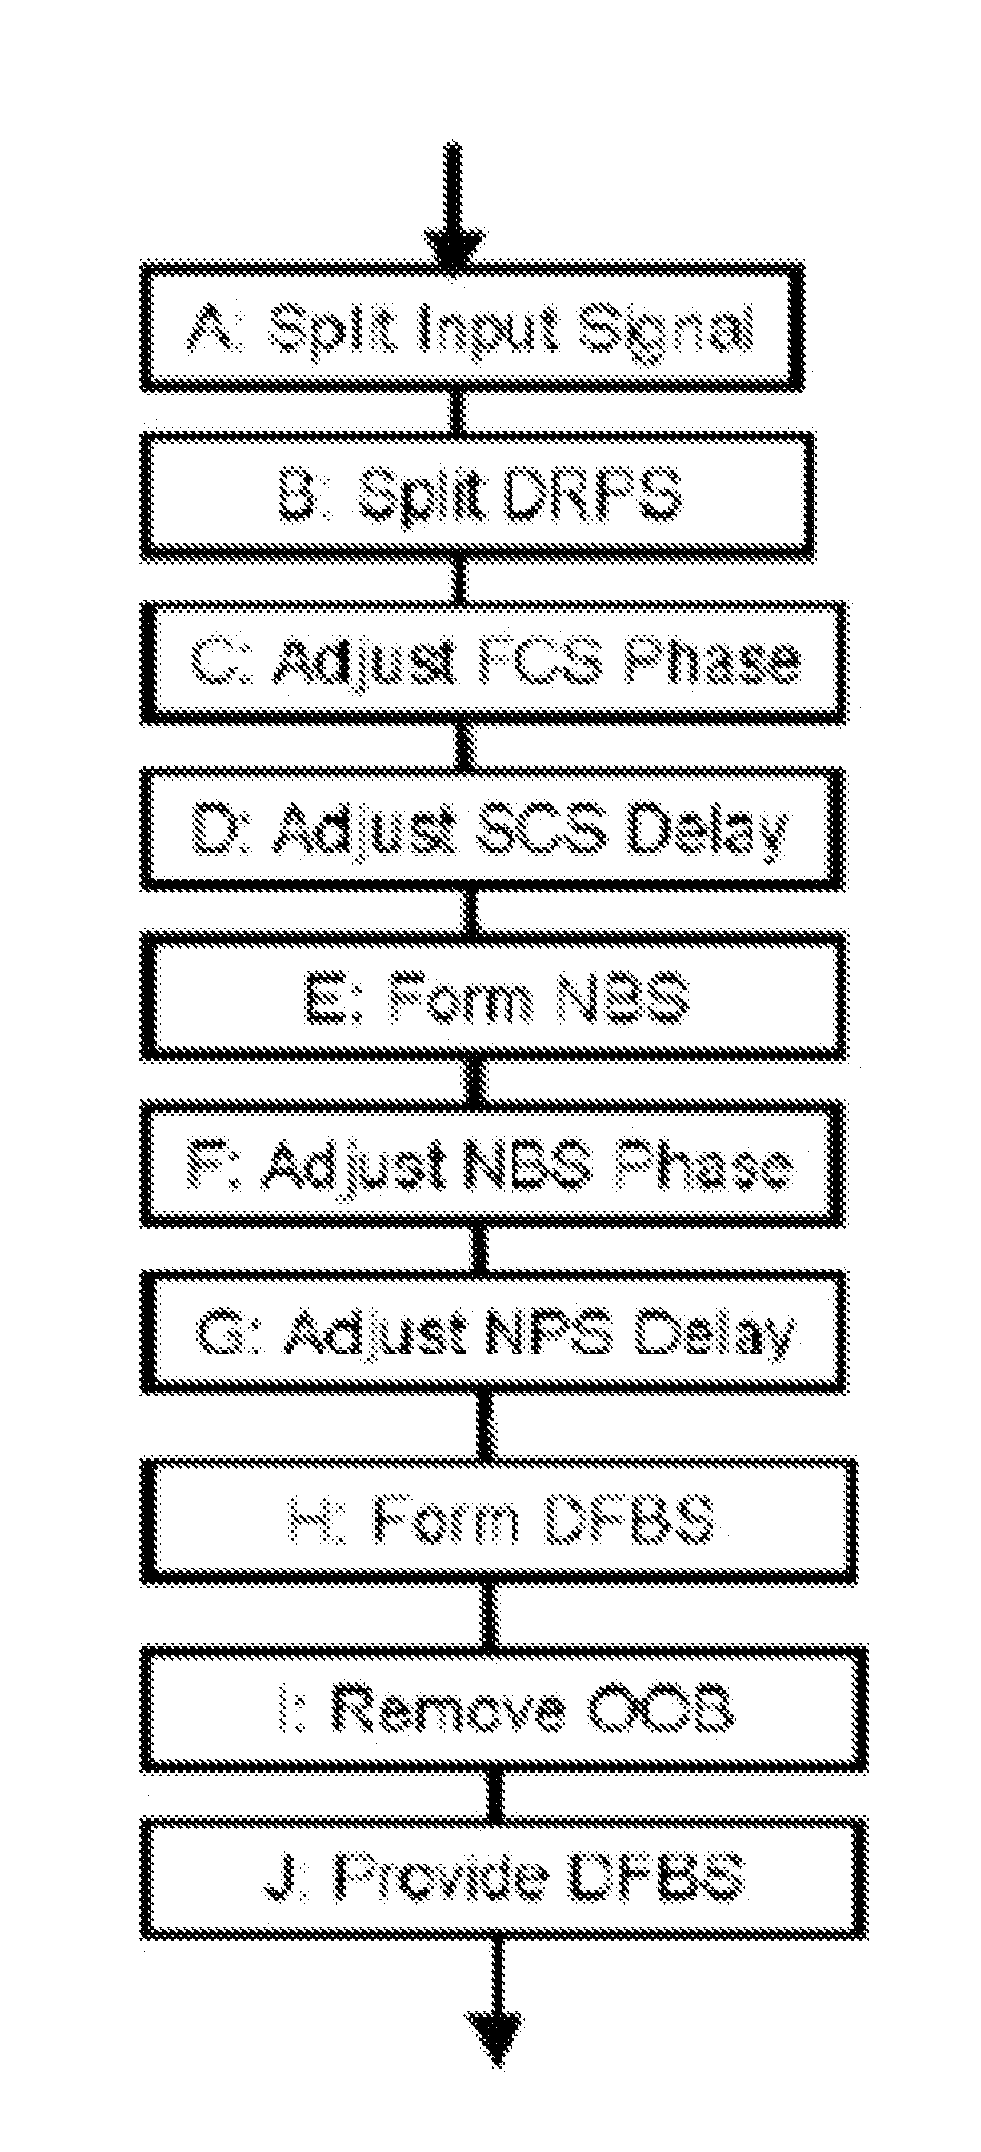 Tunable filter devices and methods